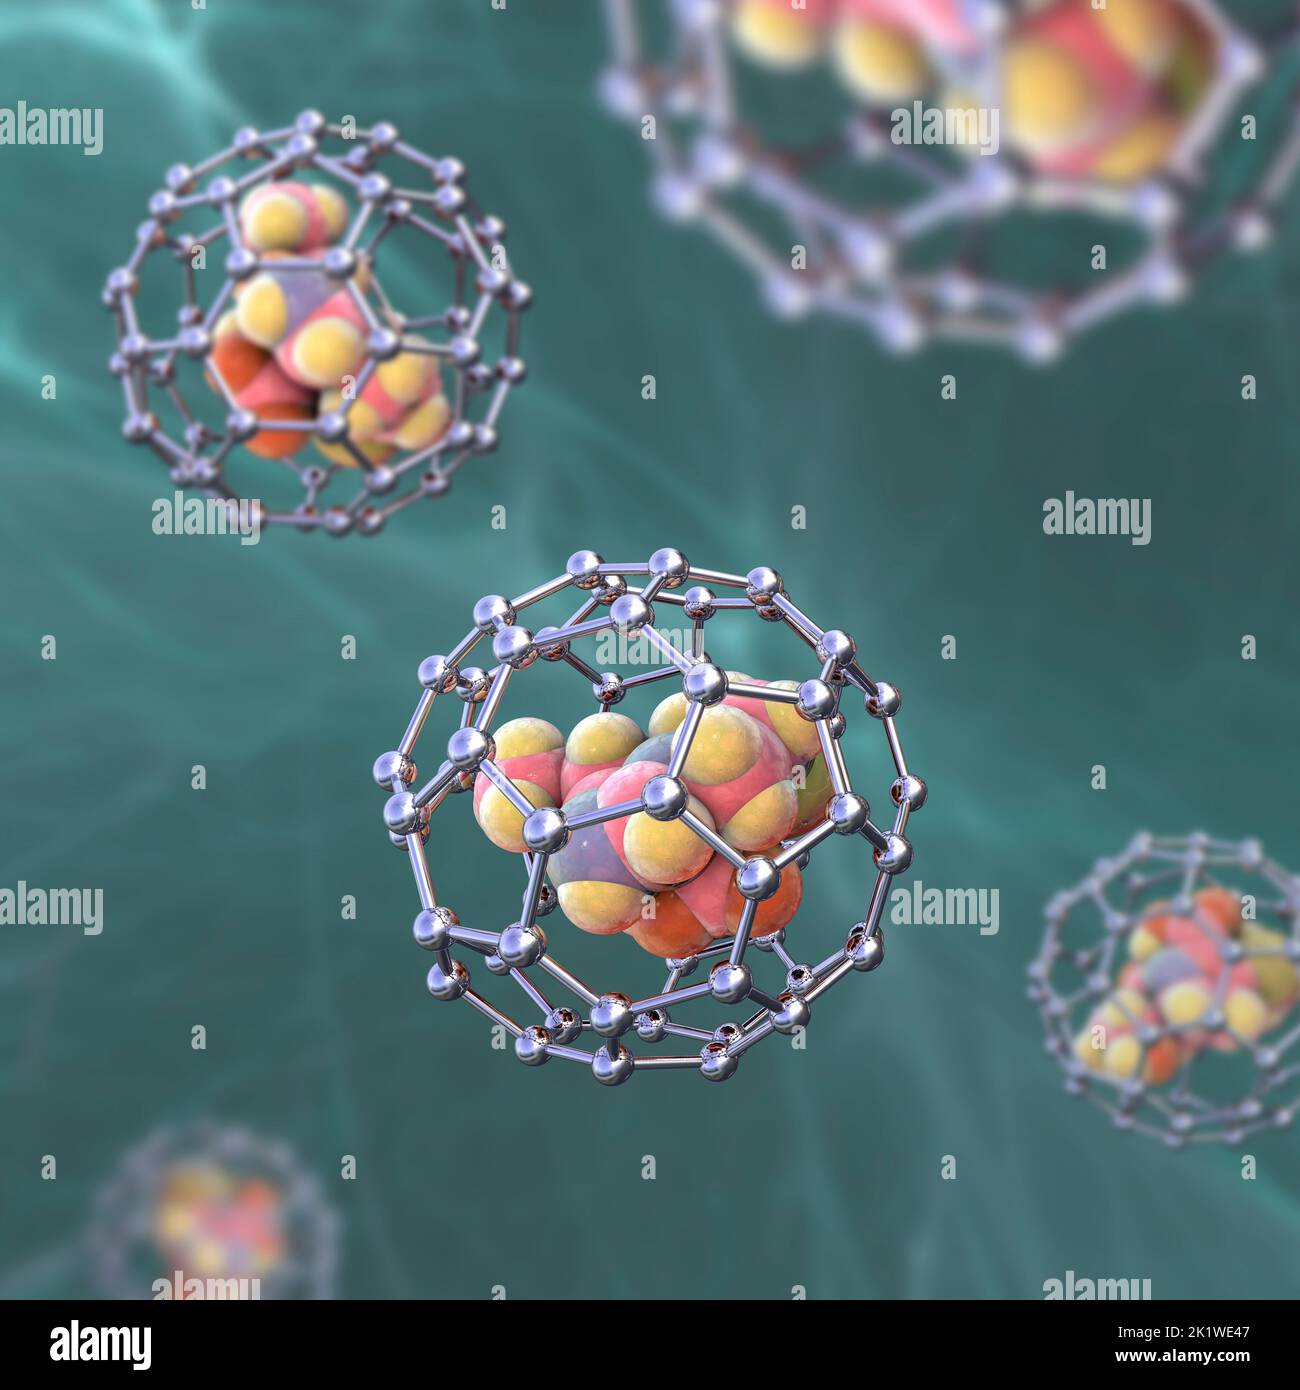 Nanoparticles in drug delivery, conceptual illustration Stock Photo